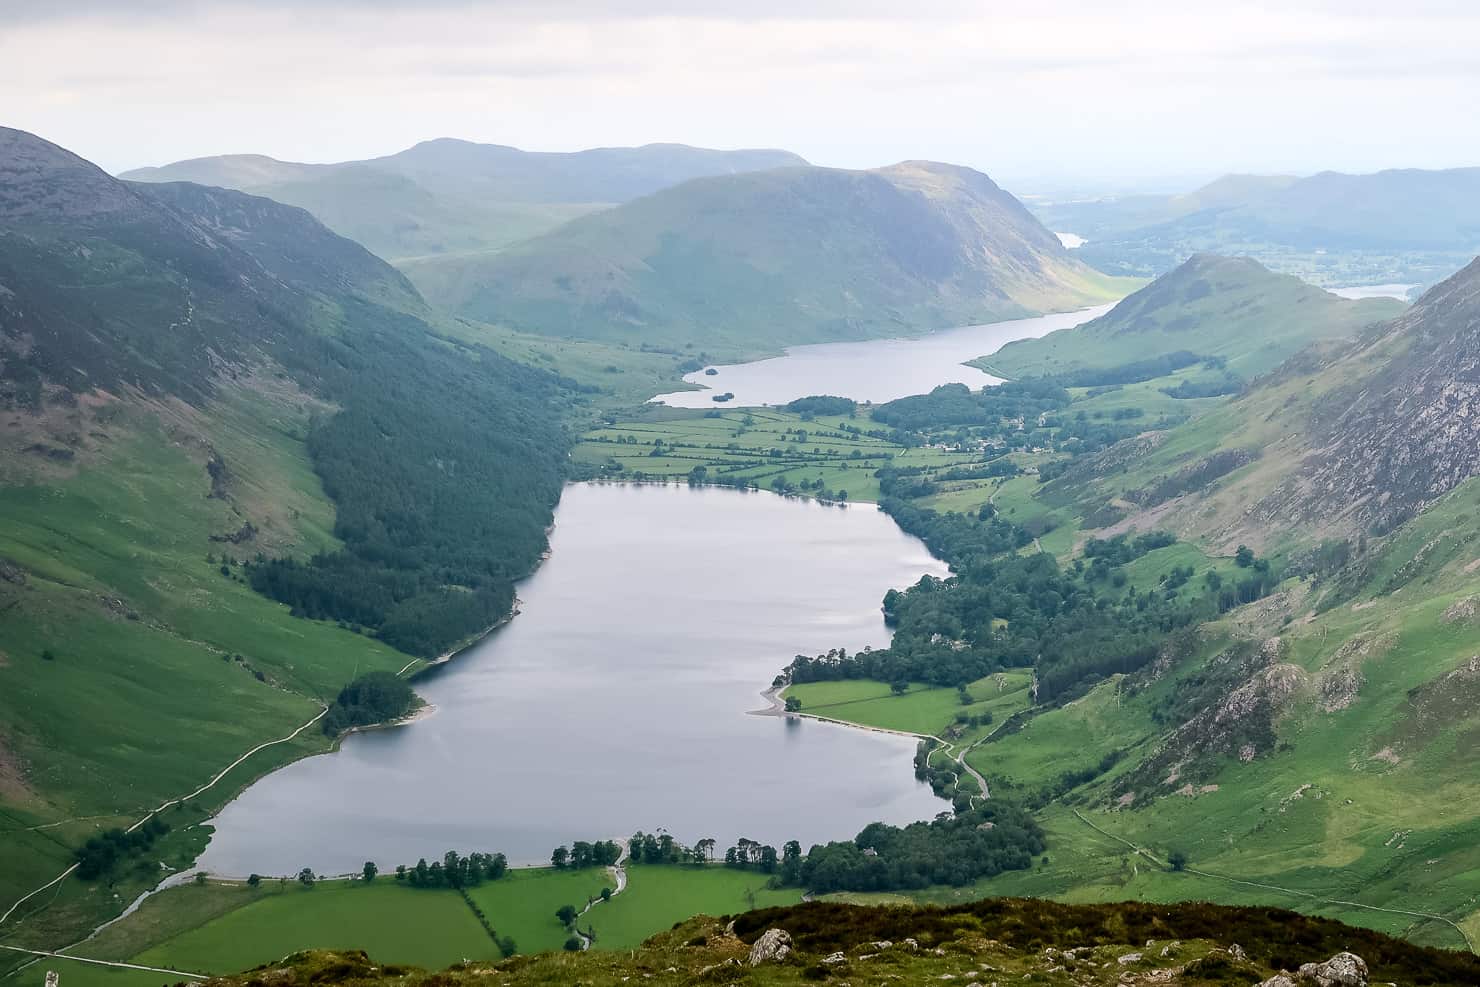 View from the top of Fleetwith Pike